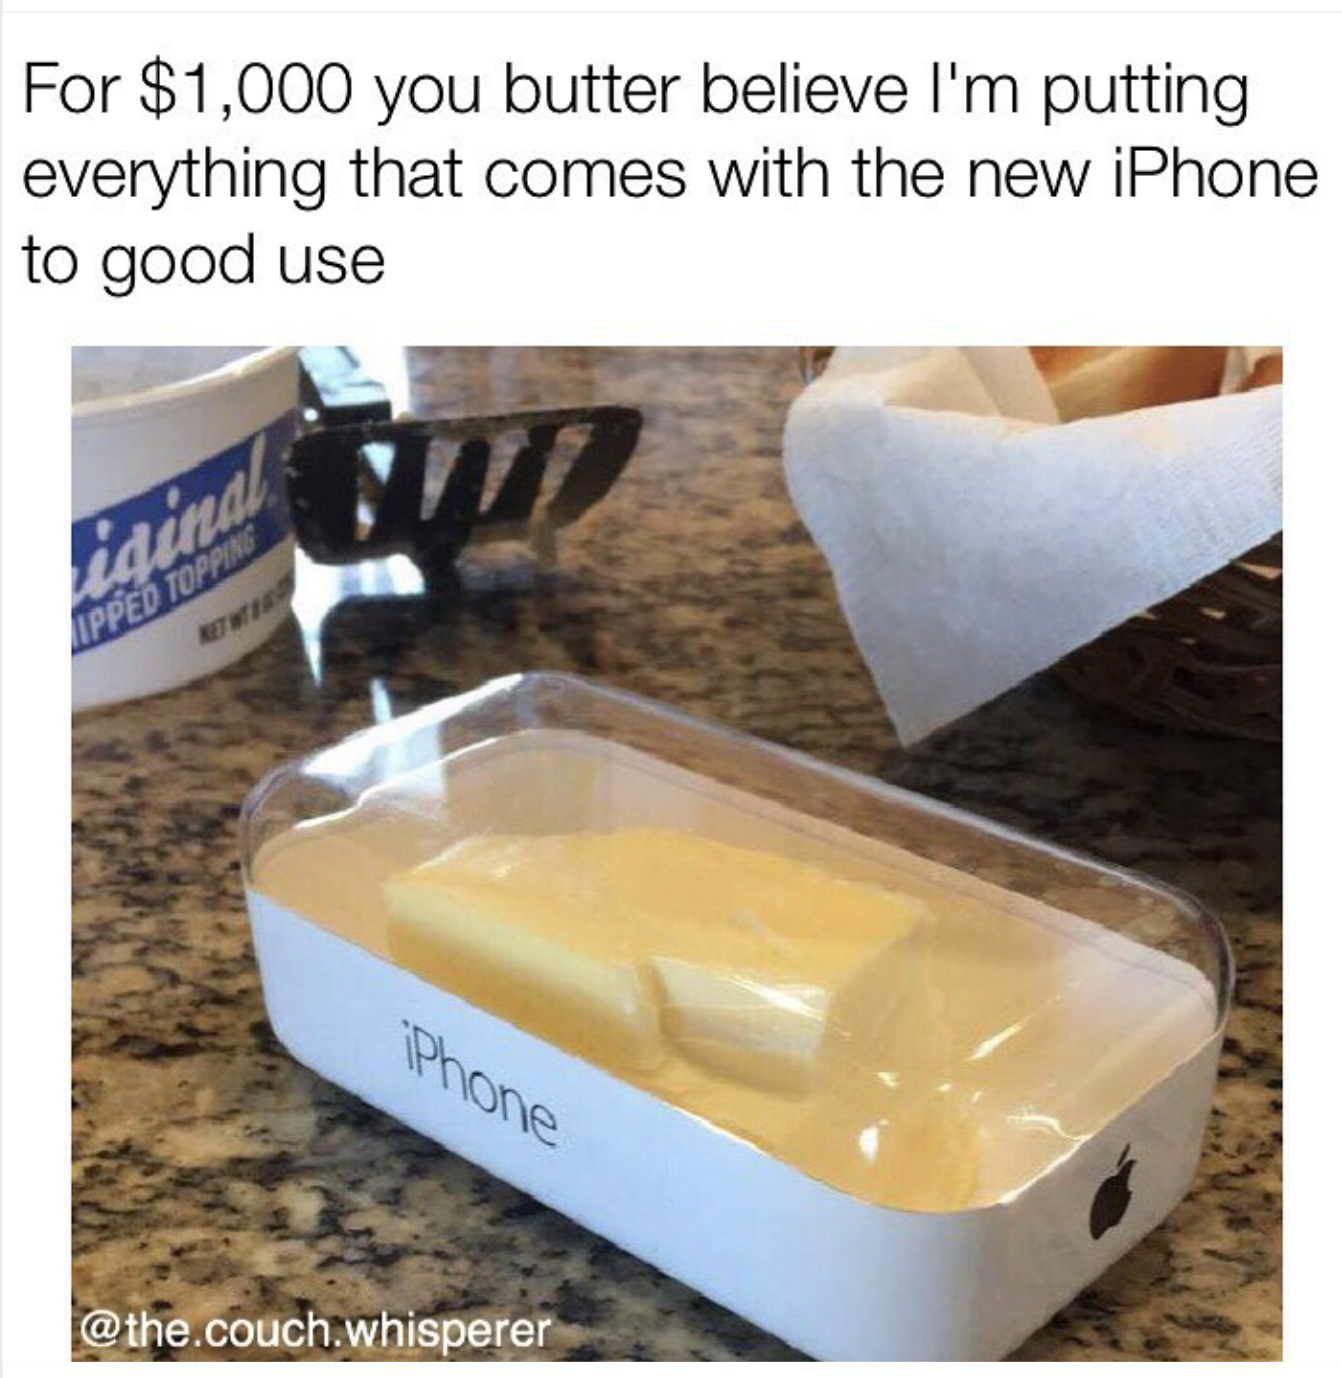 grandmas butter dish - For $1,000 you butter believe I'm putting everything that comes with the new iPhone to good use Phone .couch.whisperer